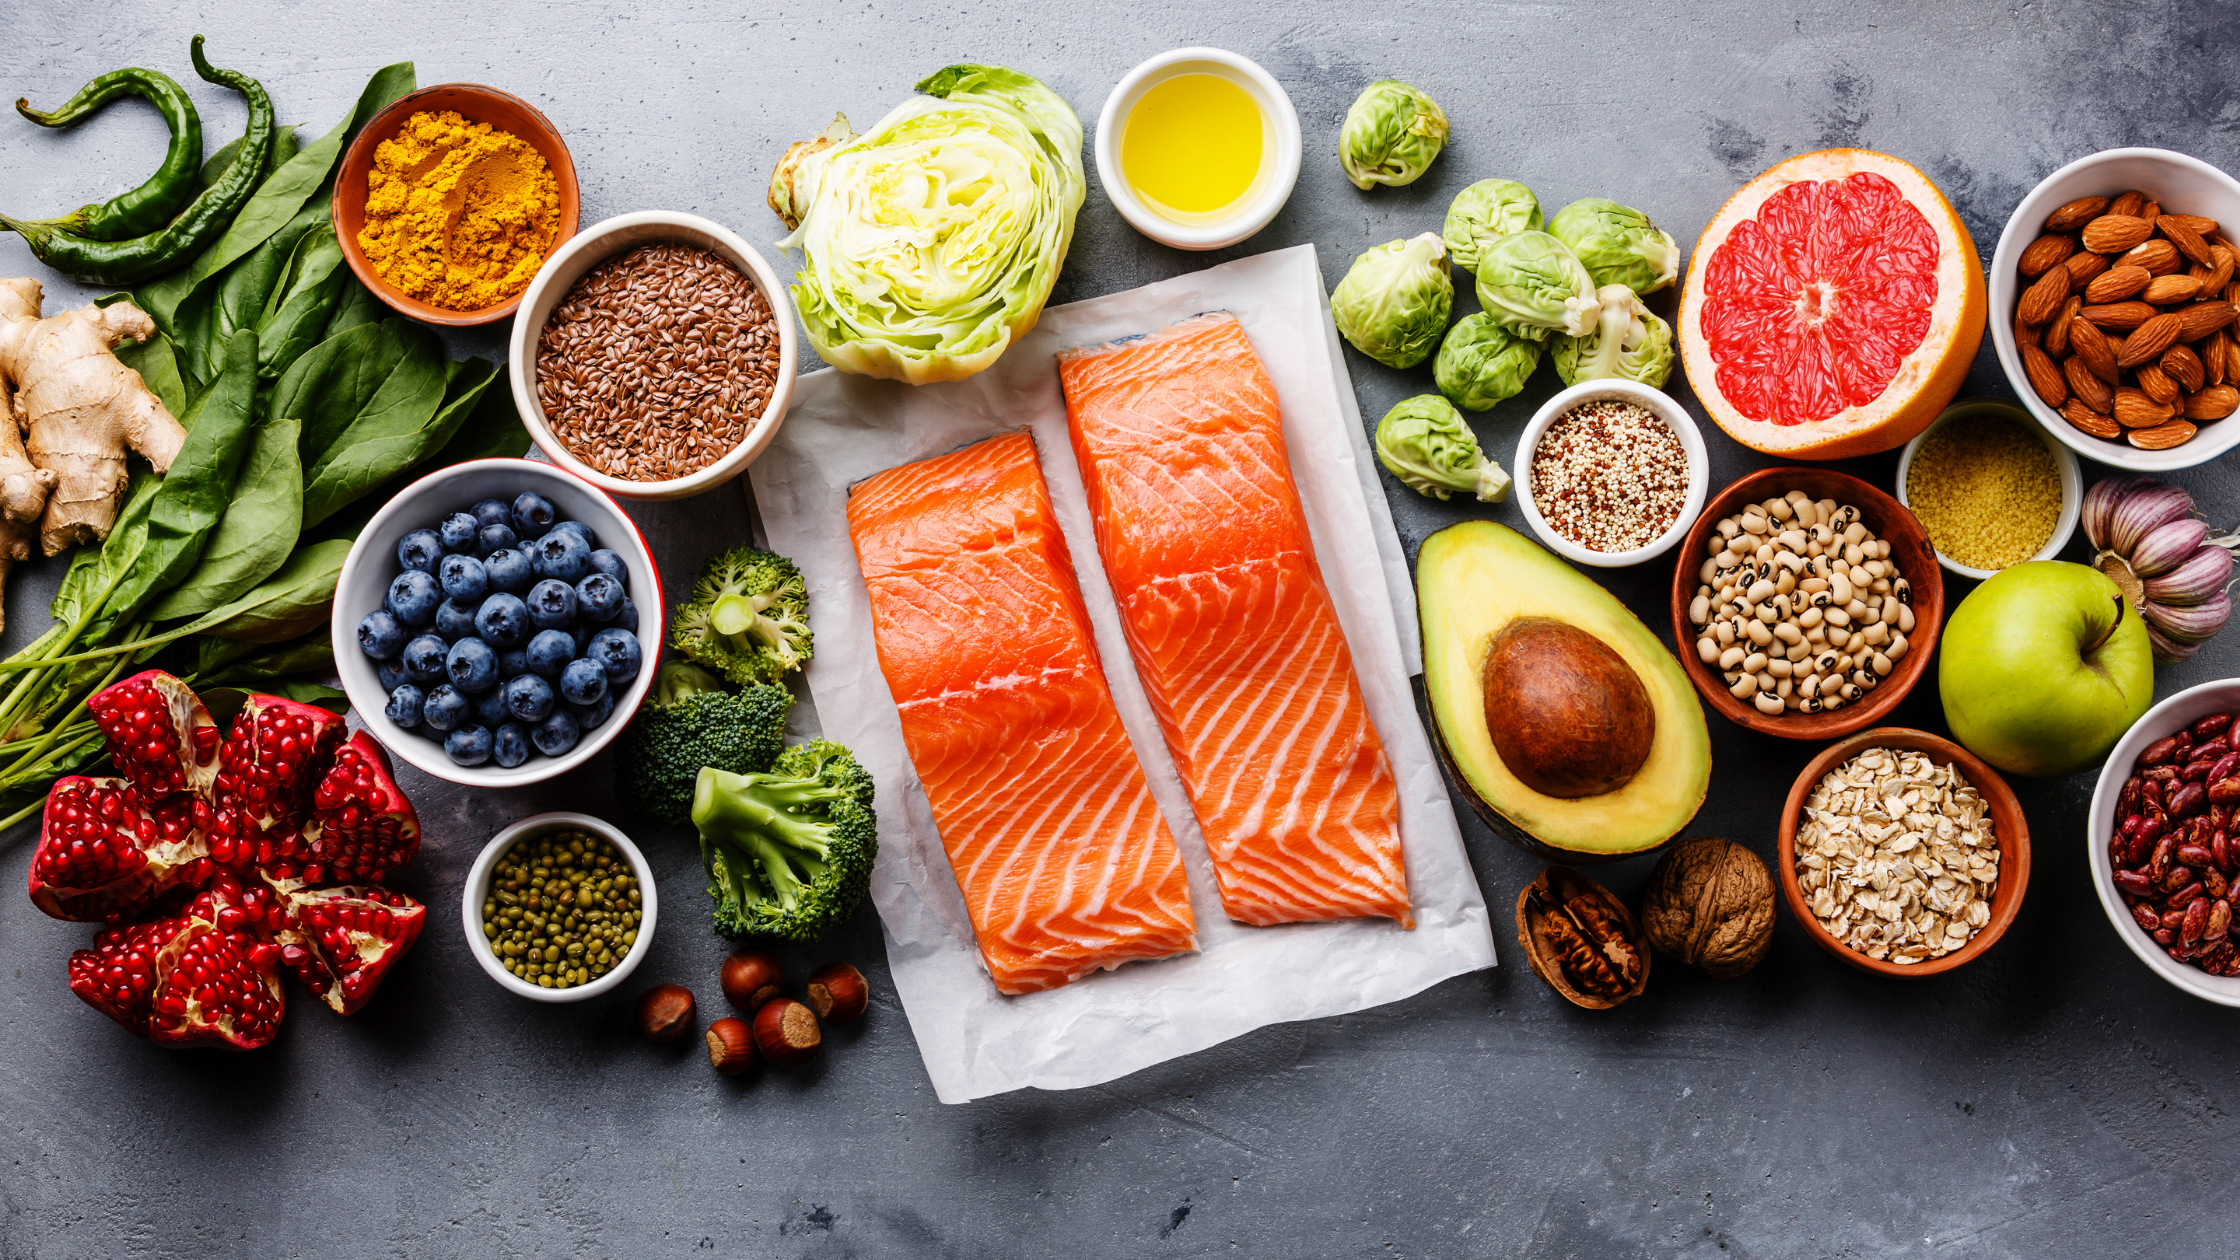 Choose These Healthy Fats for Your Holiday Meal